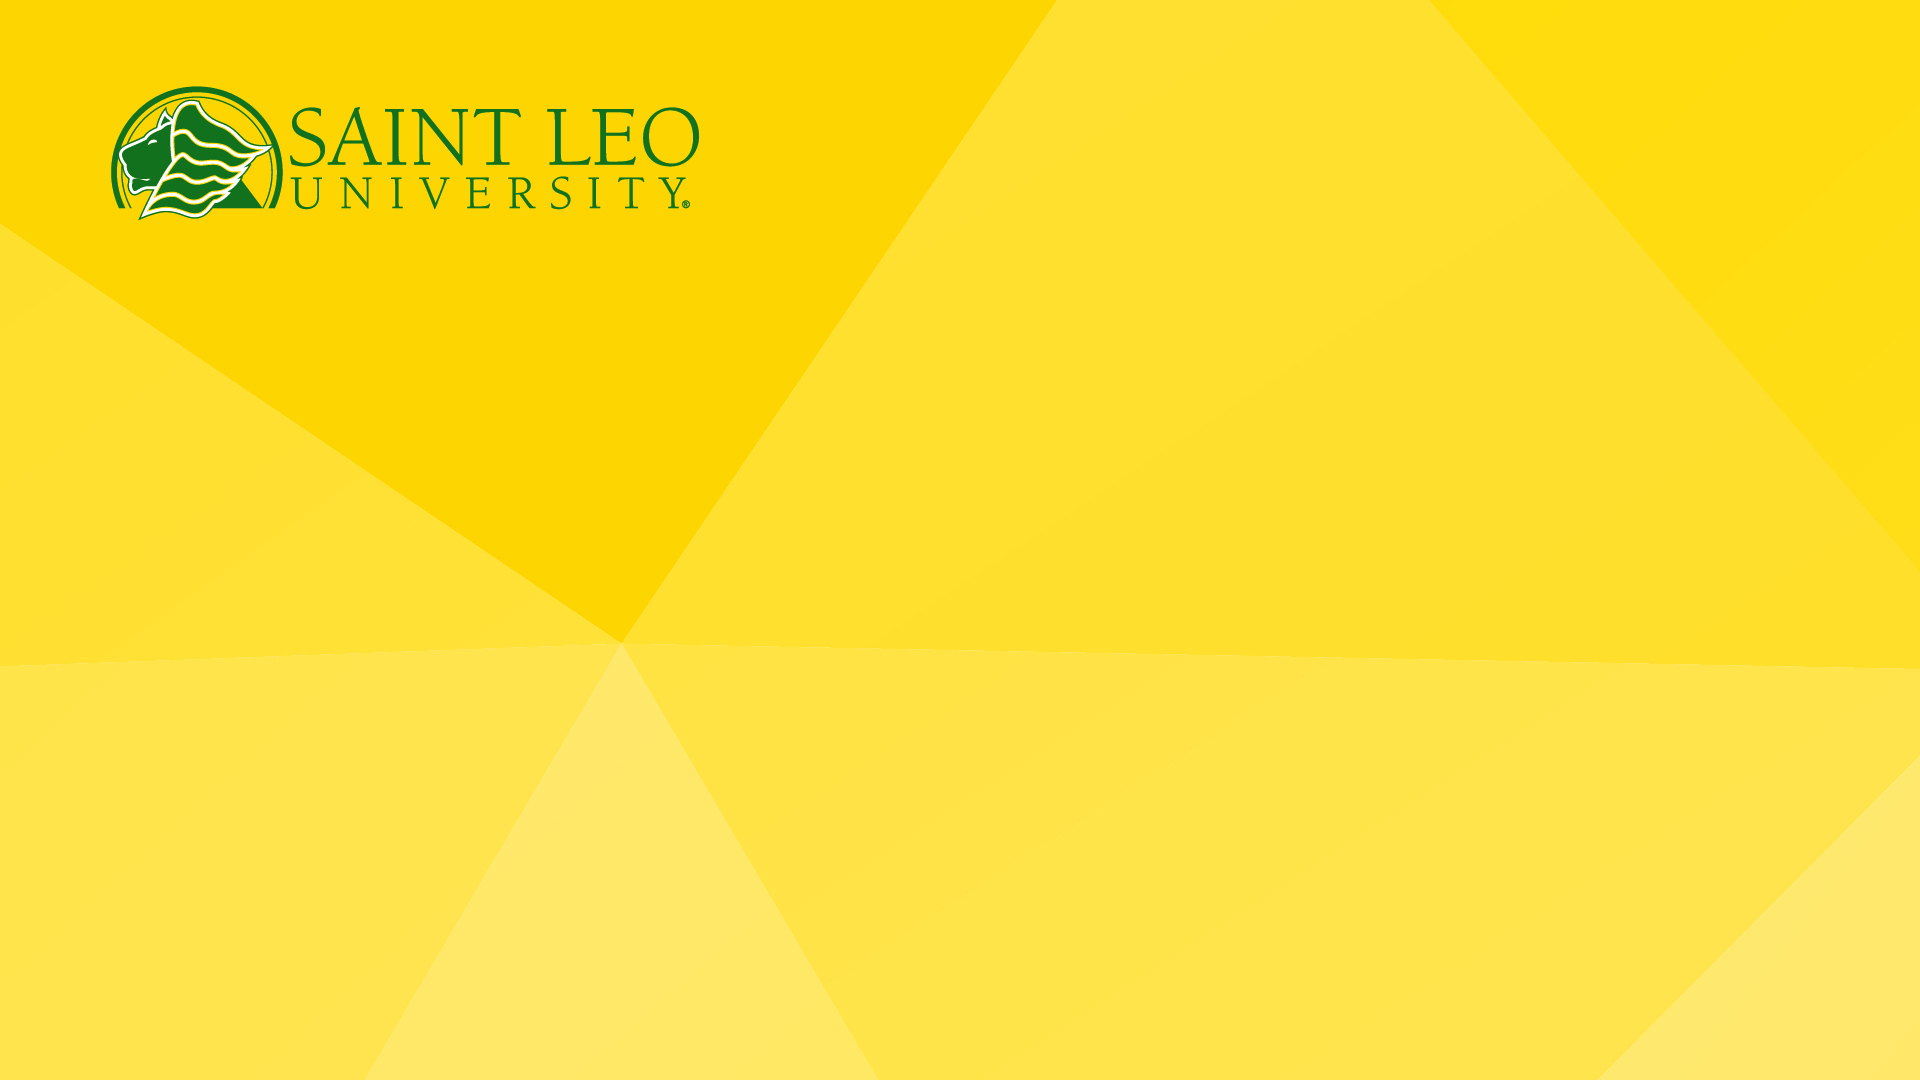 Show your Saint Leo Pride with branded Zoom backgrounds Community